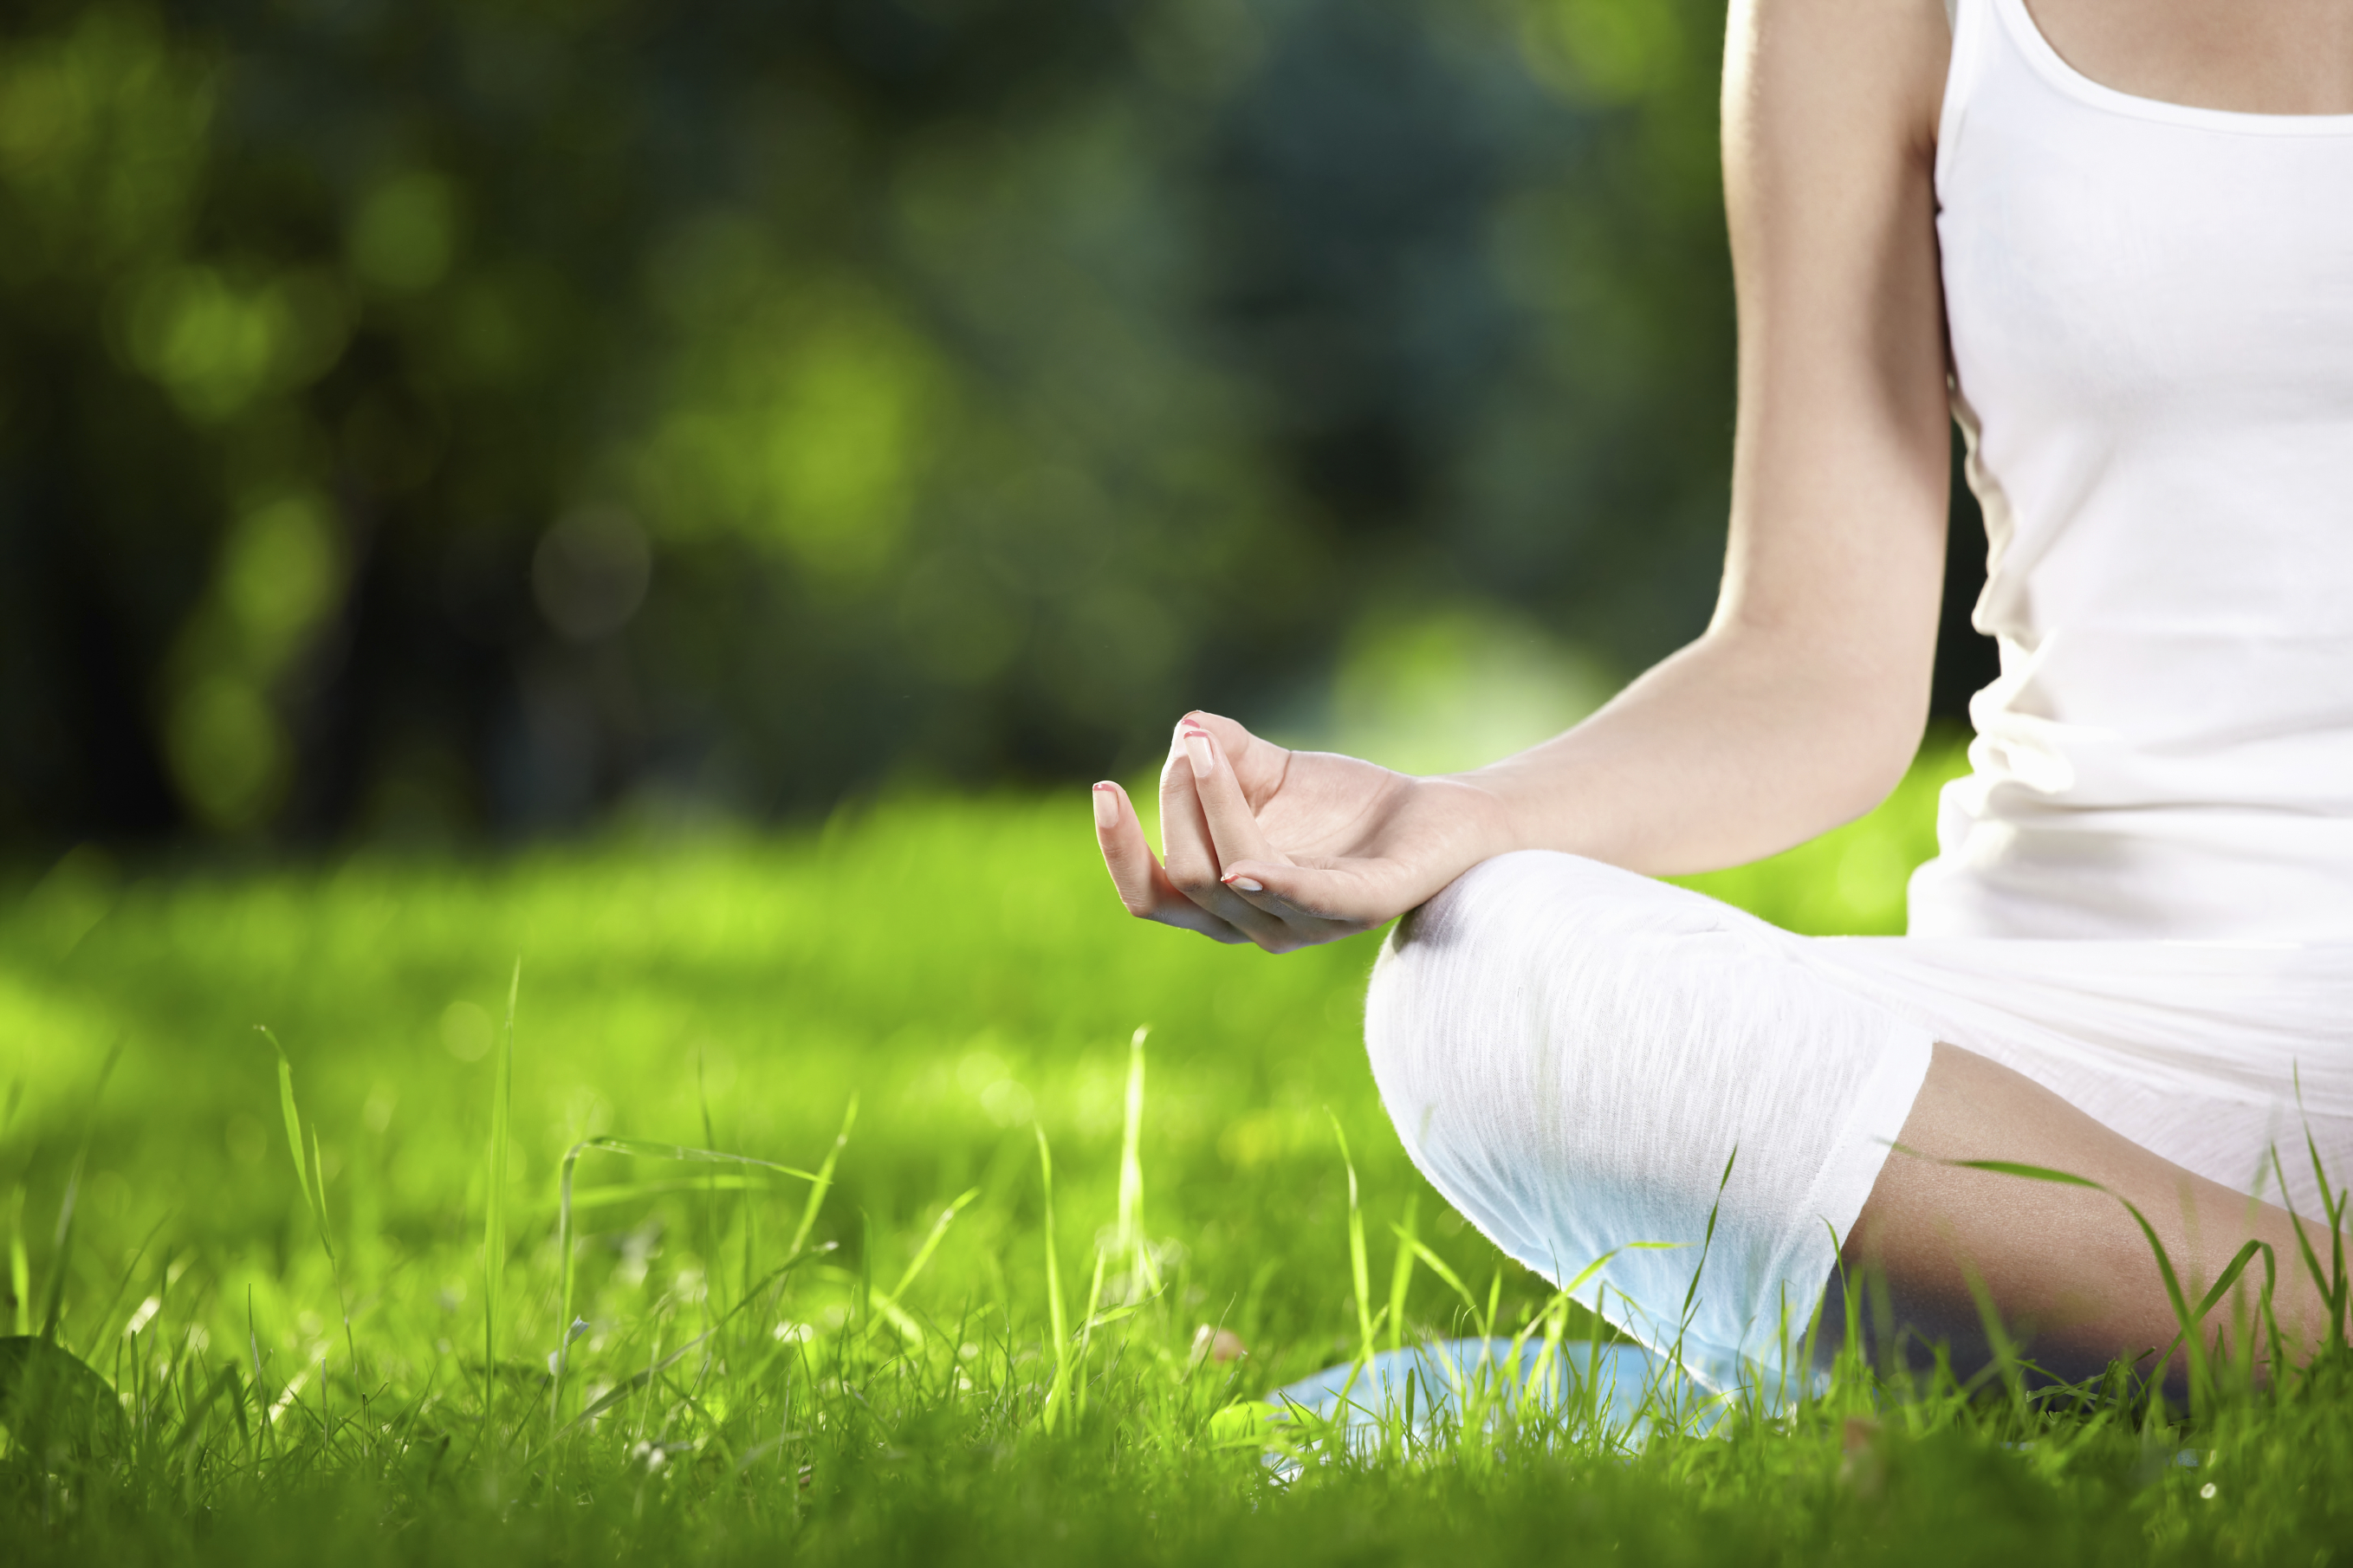 7 ways Mindfulness Can Help Control Your Spending